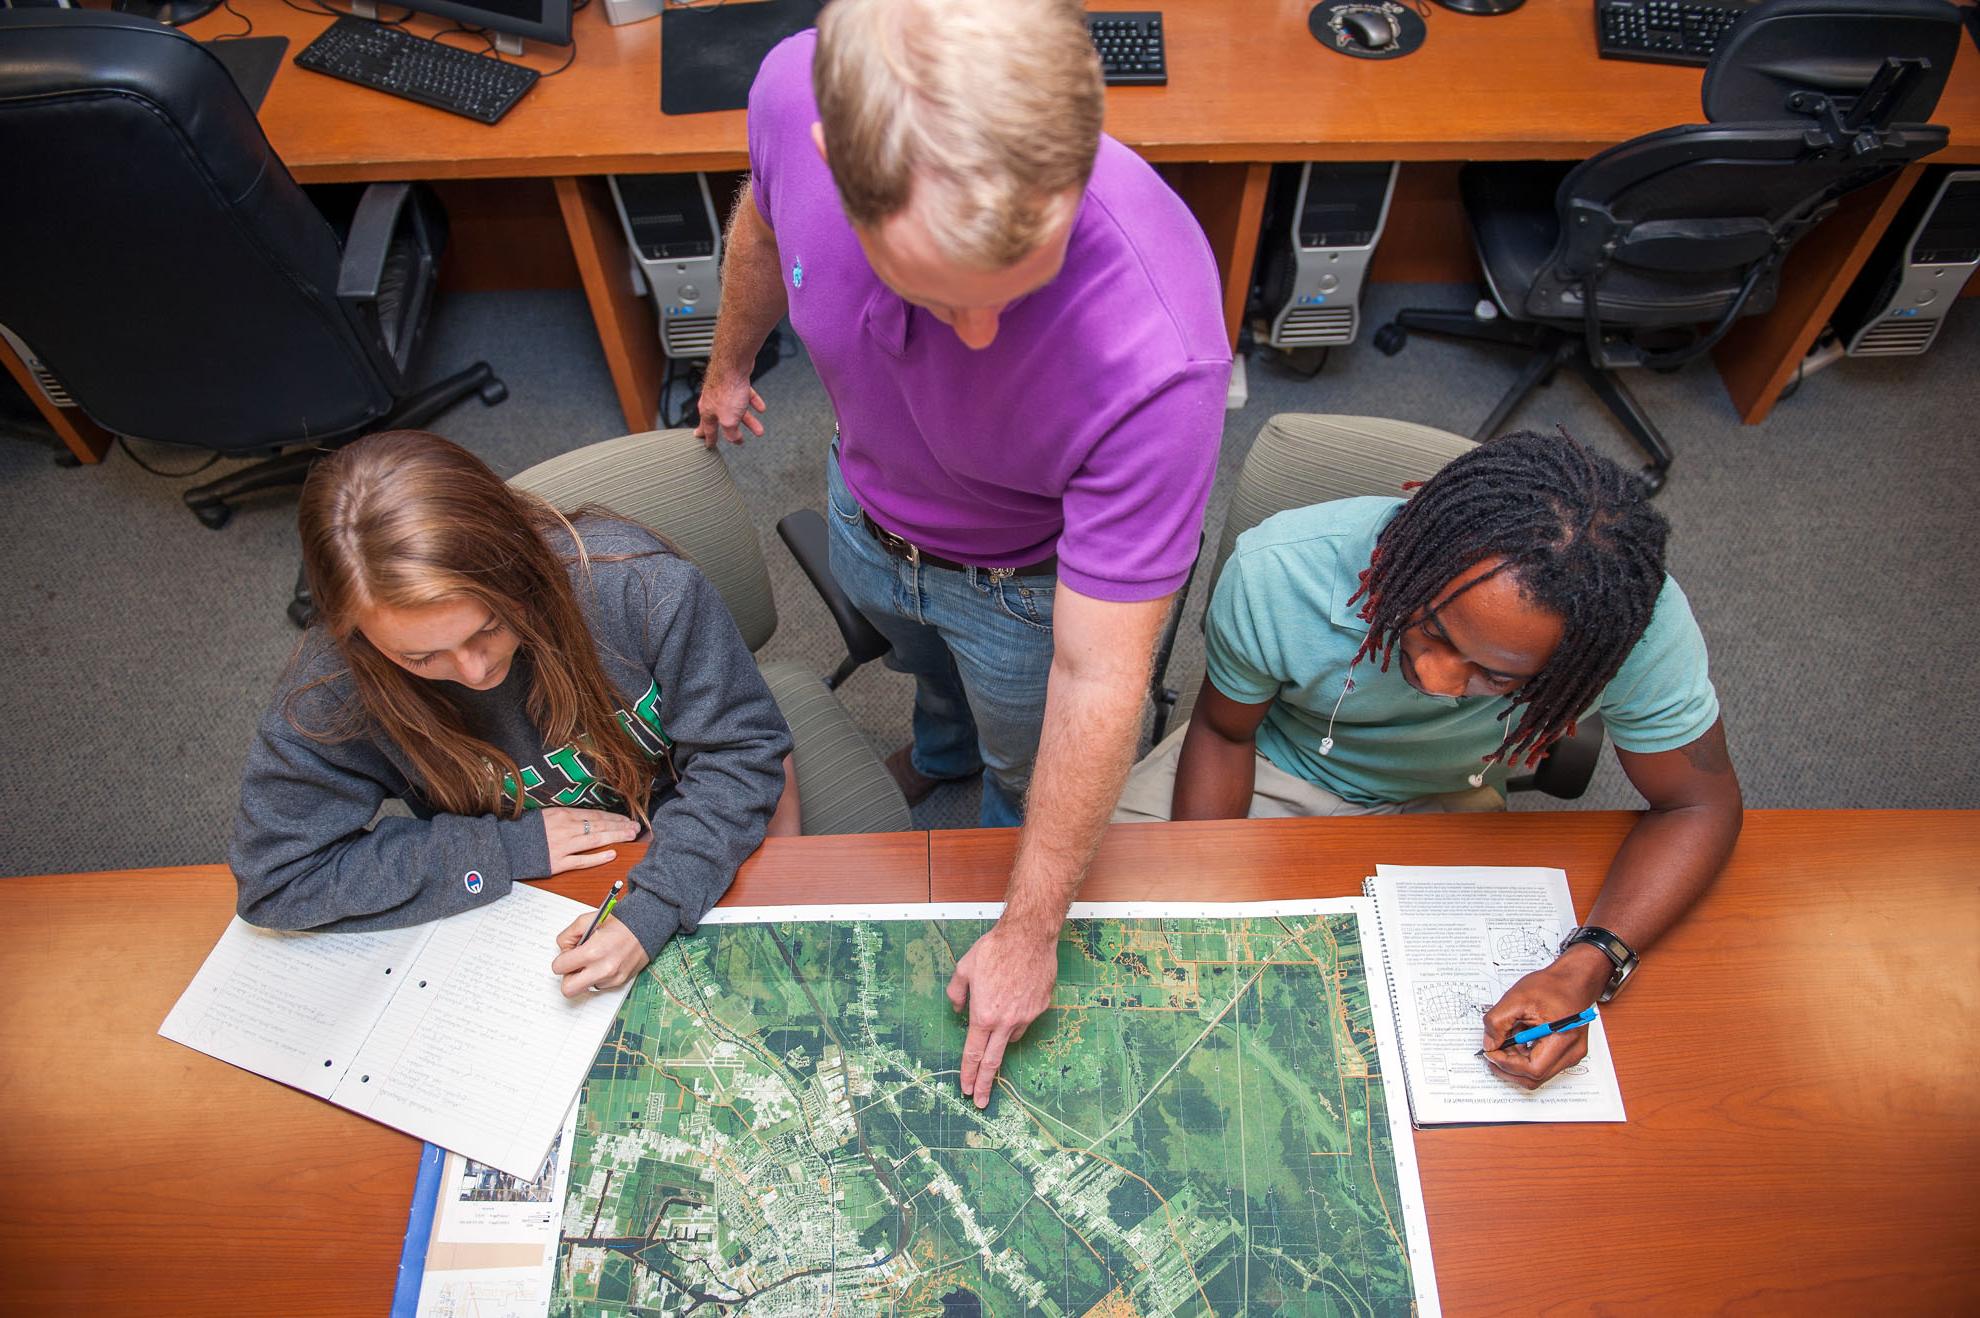 Instructor pointing at map on a table with two students on both sides of him.